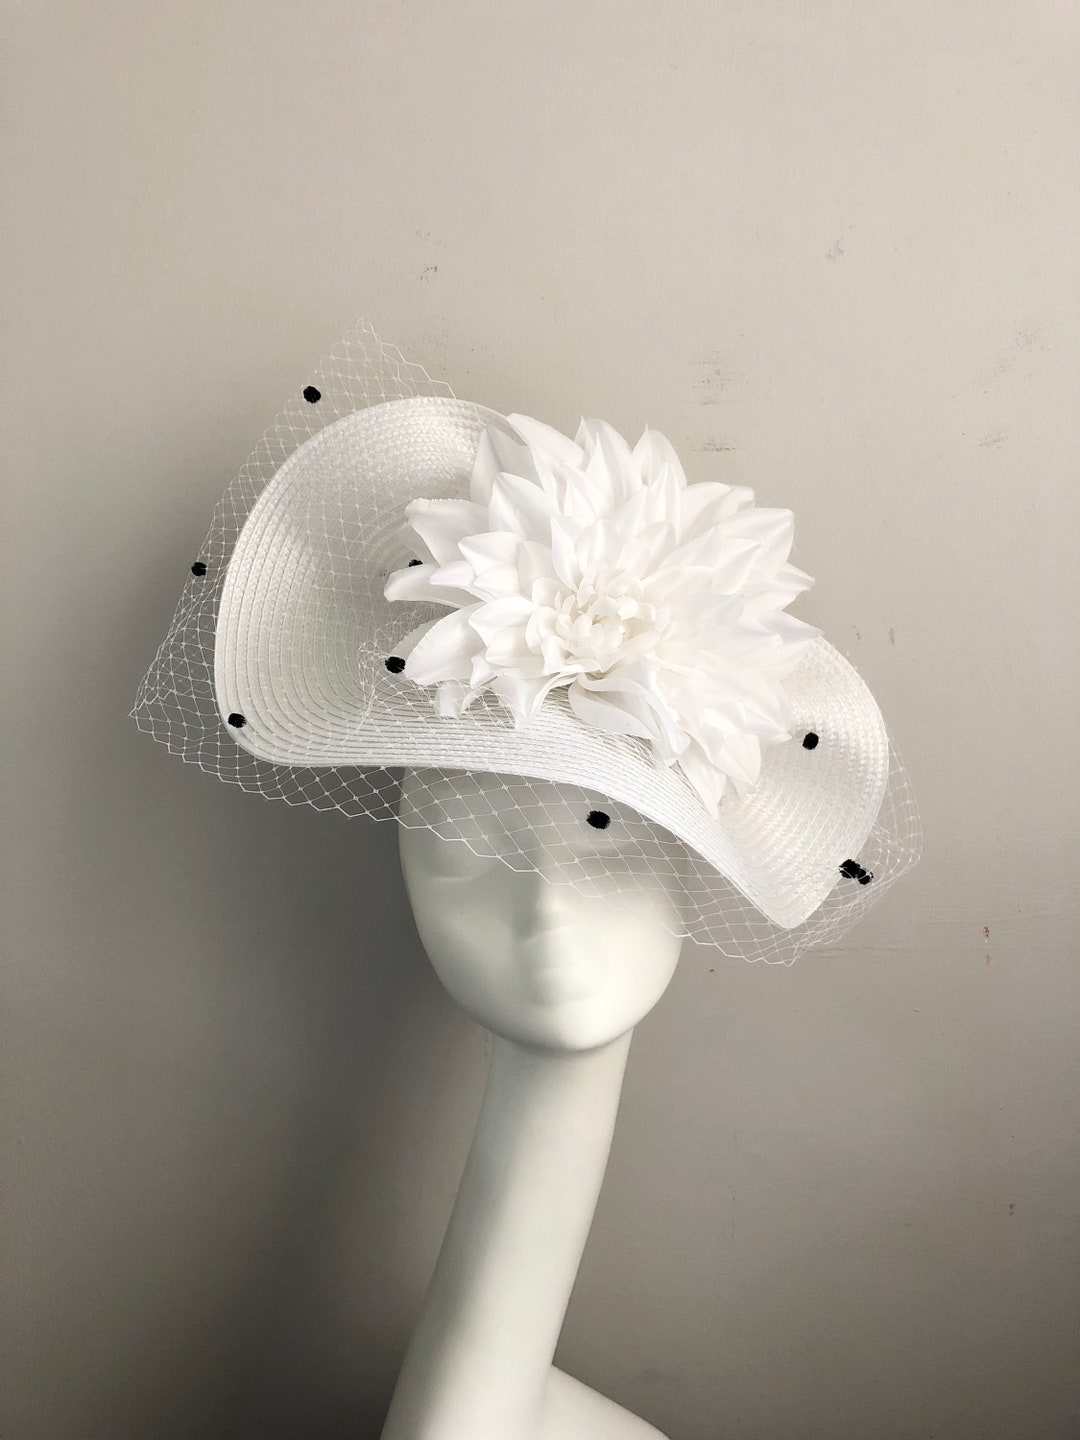 White Bride Fascinator Felt, Winter Wedding Hat for Woman, White Felt Ascot  Hat With Peacock Feathers, Derby Fascinator Hat, Tea Party Hats -   Denmark